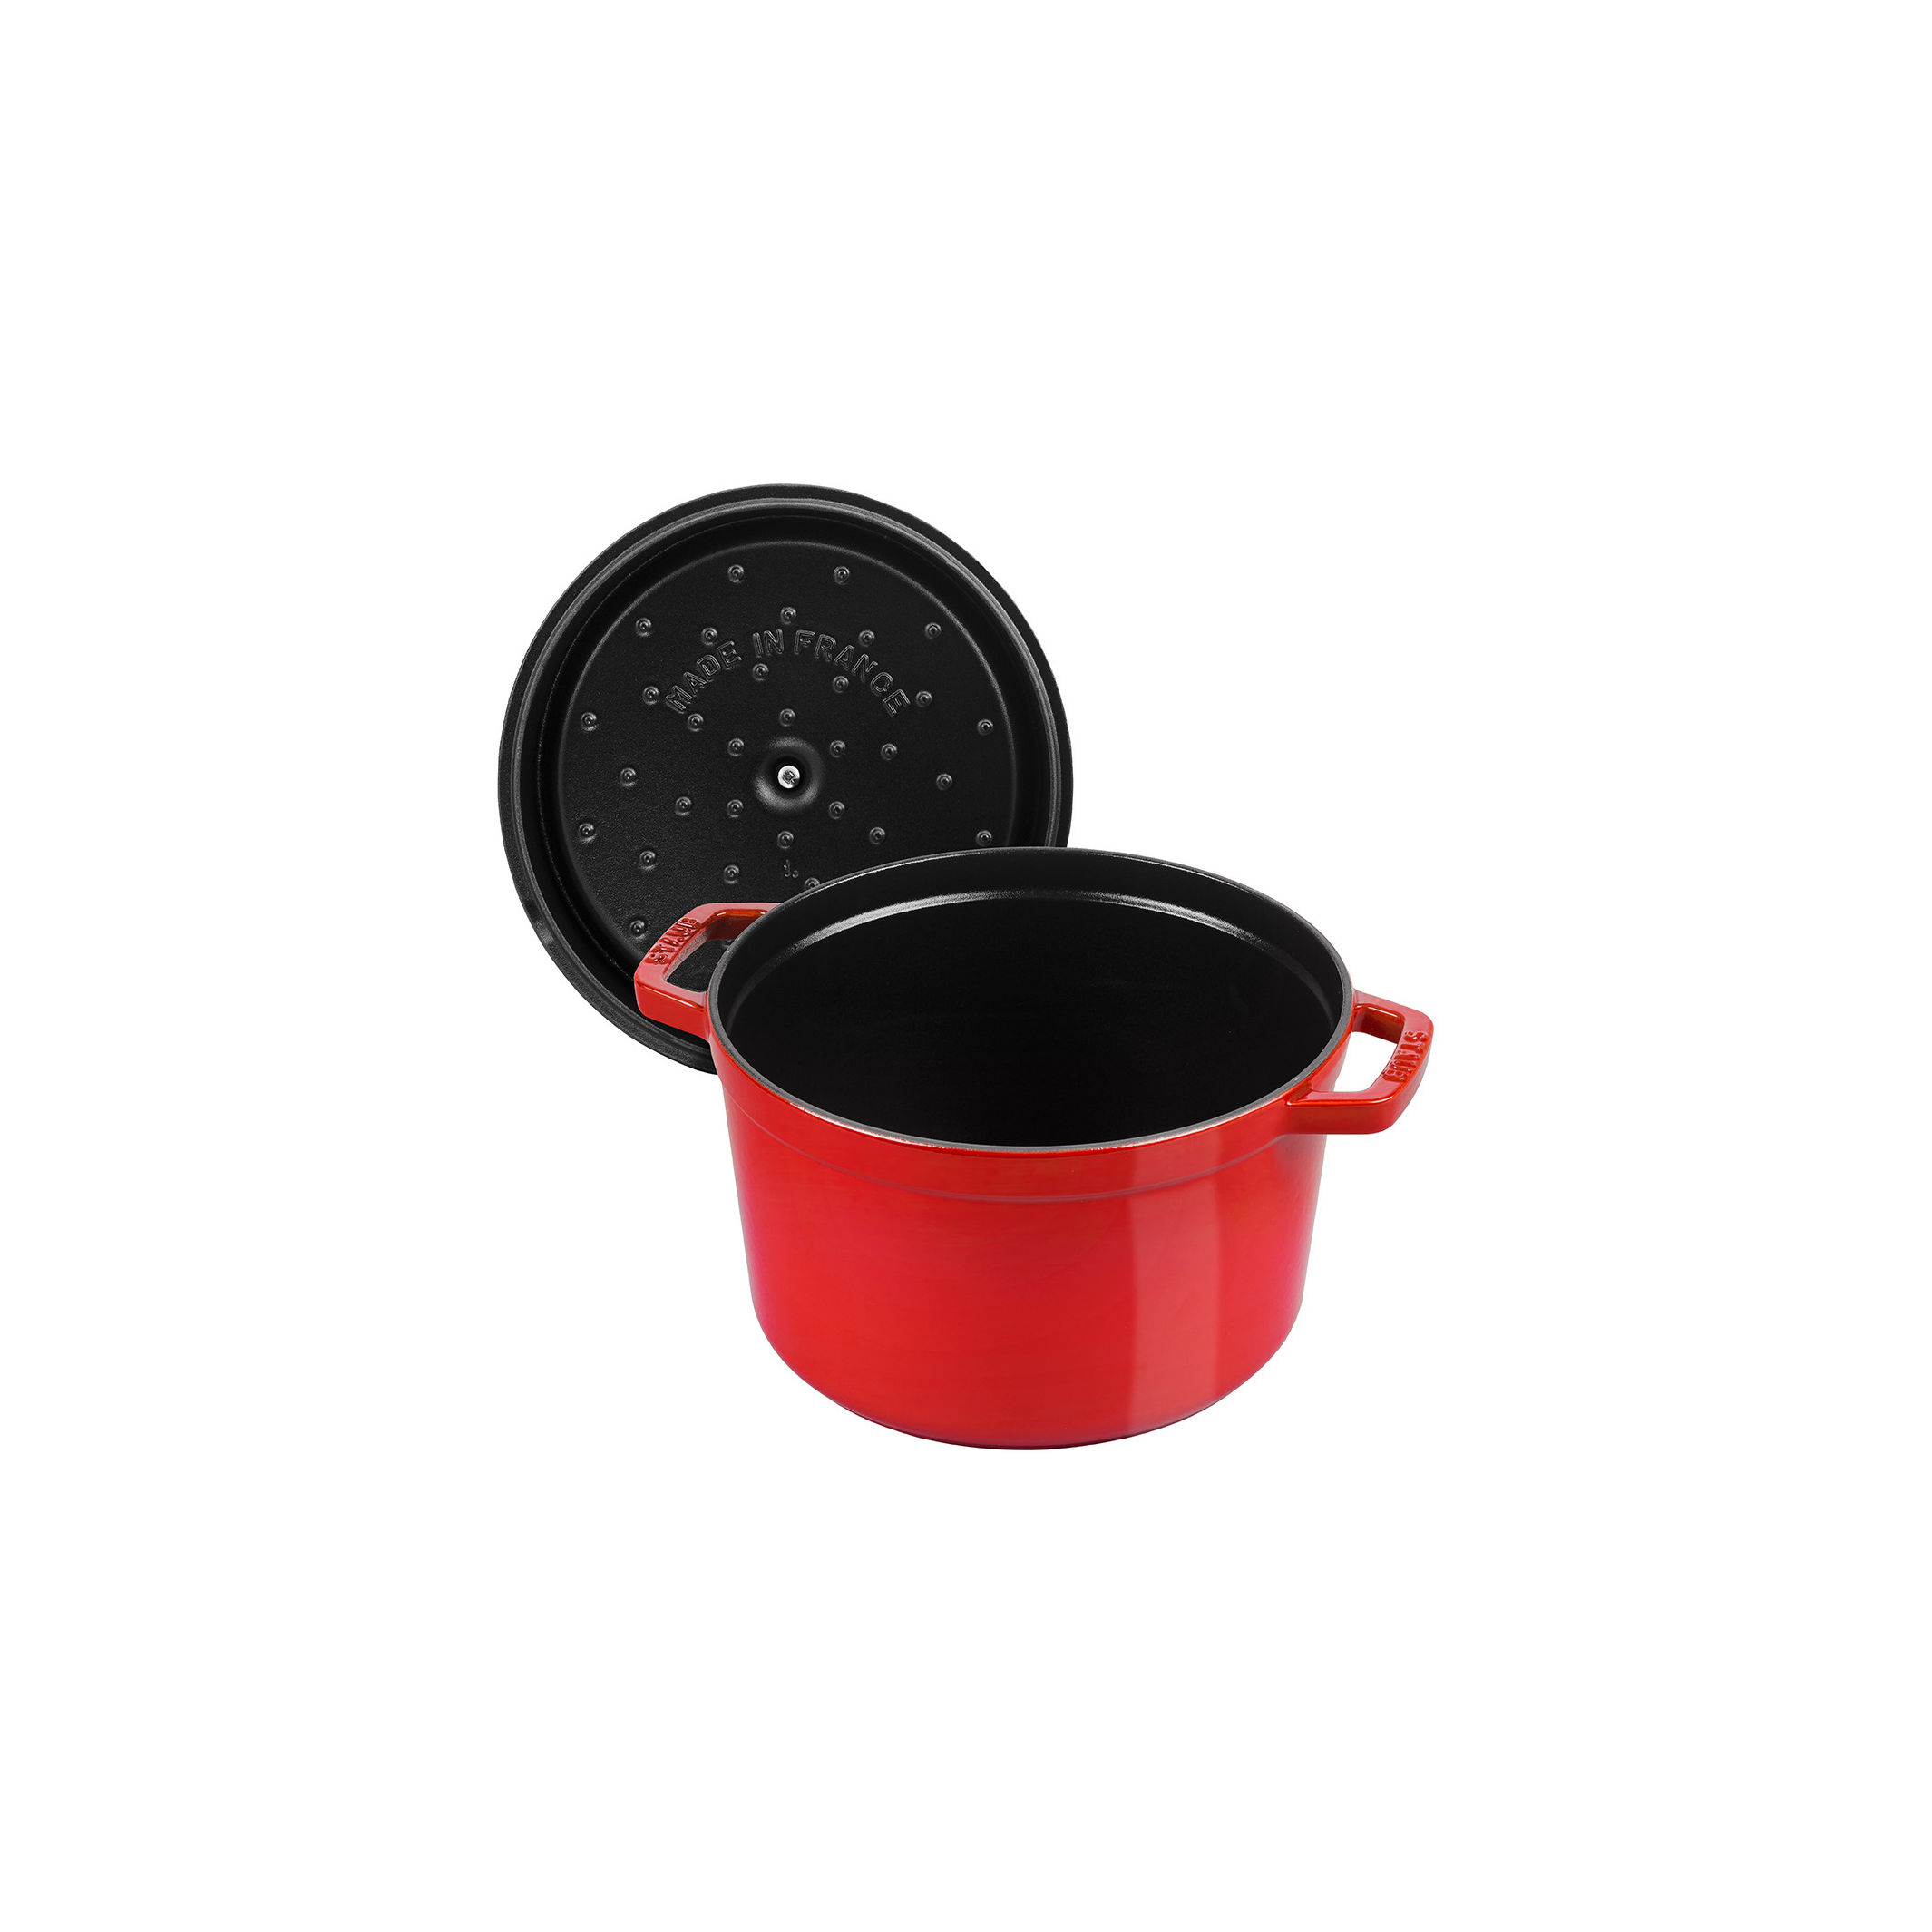 Today Only:STAUB TALL COCOTTE, 5 QT $139.96